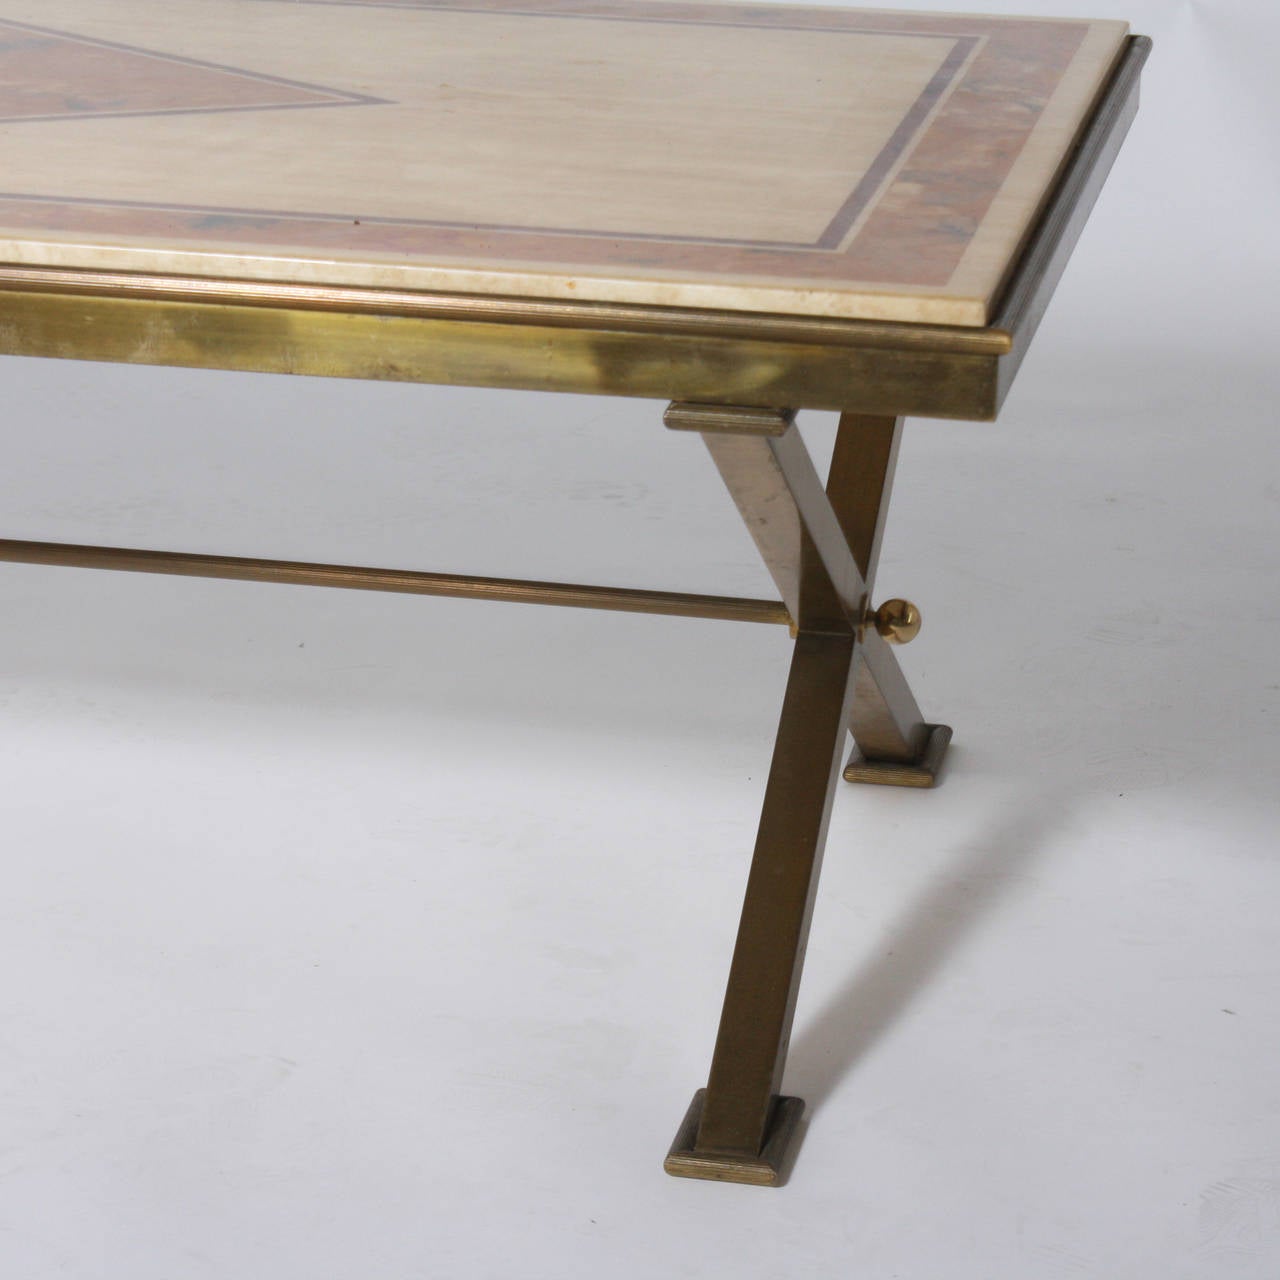 Bronze x-base coffee table with travertine top and faux marble by Jansen.